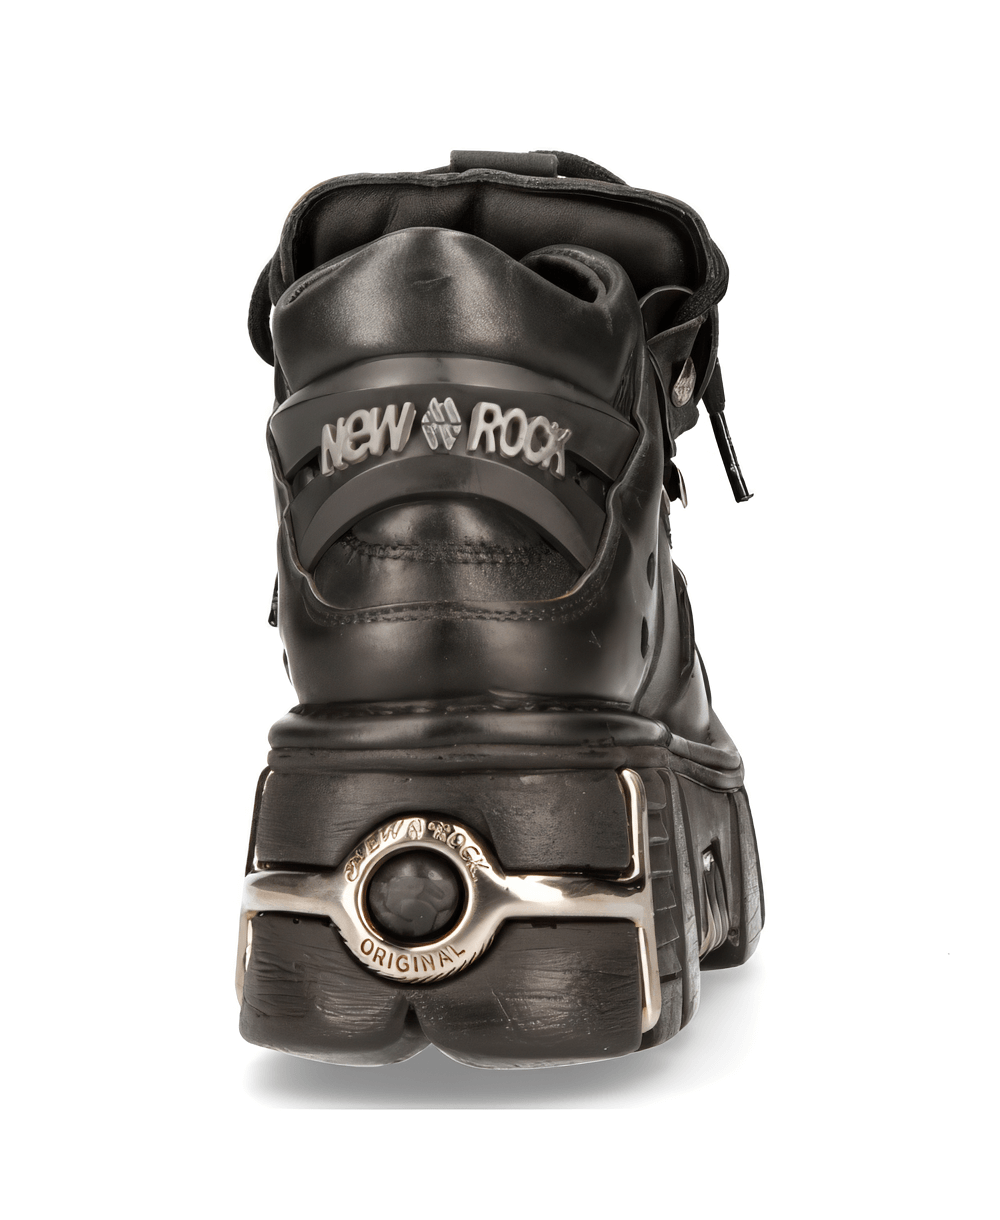 NEW ROCK Black Gothic Ankle Boots with Metallic Accents